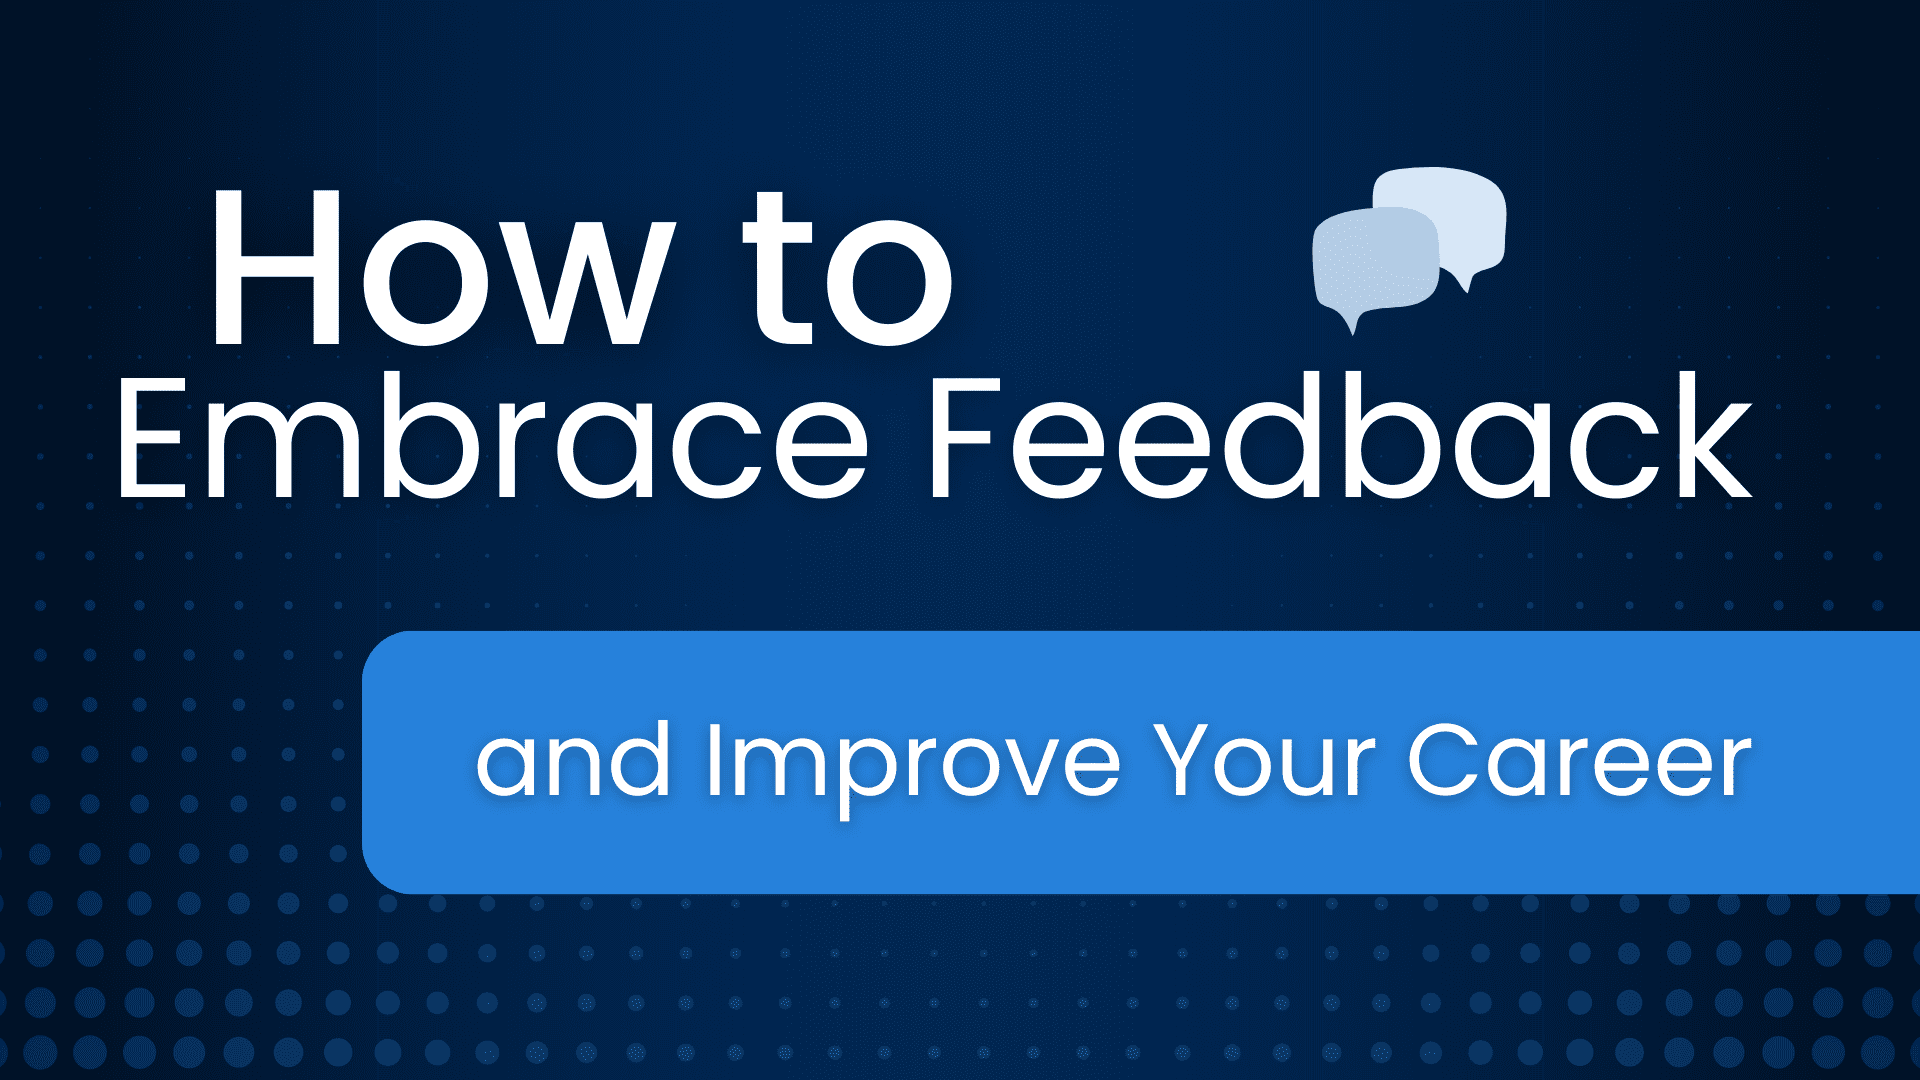 photo text: how to embrace feedback and improve your career